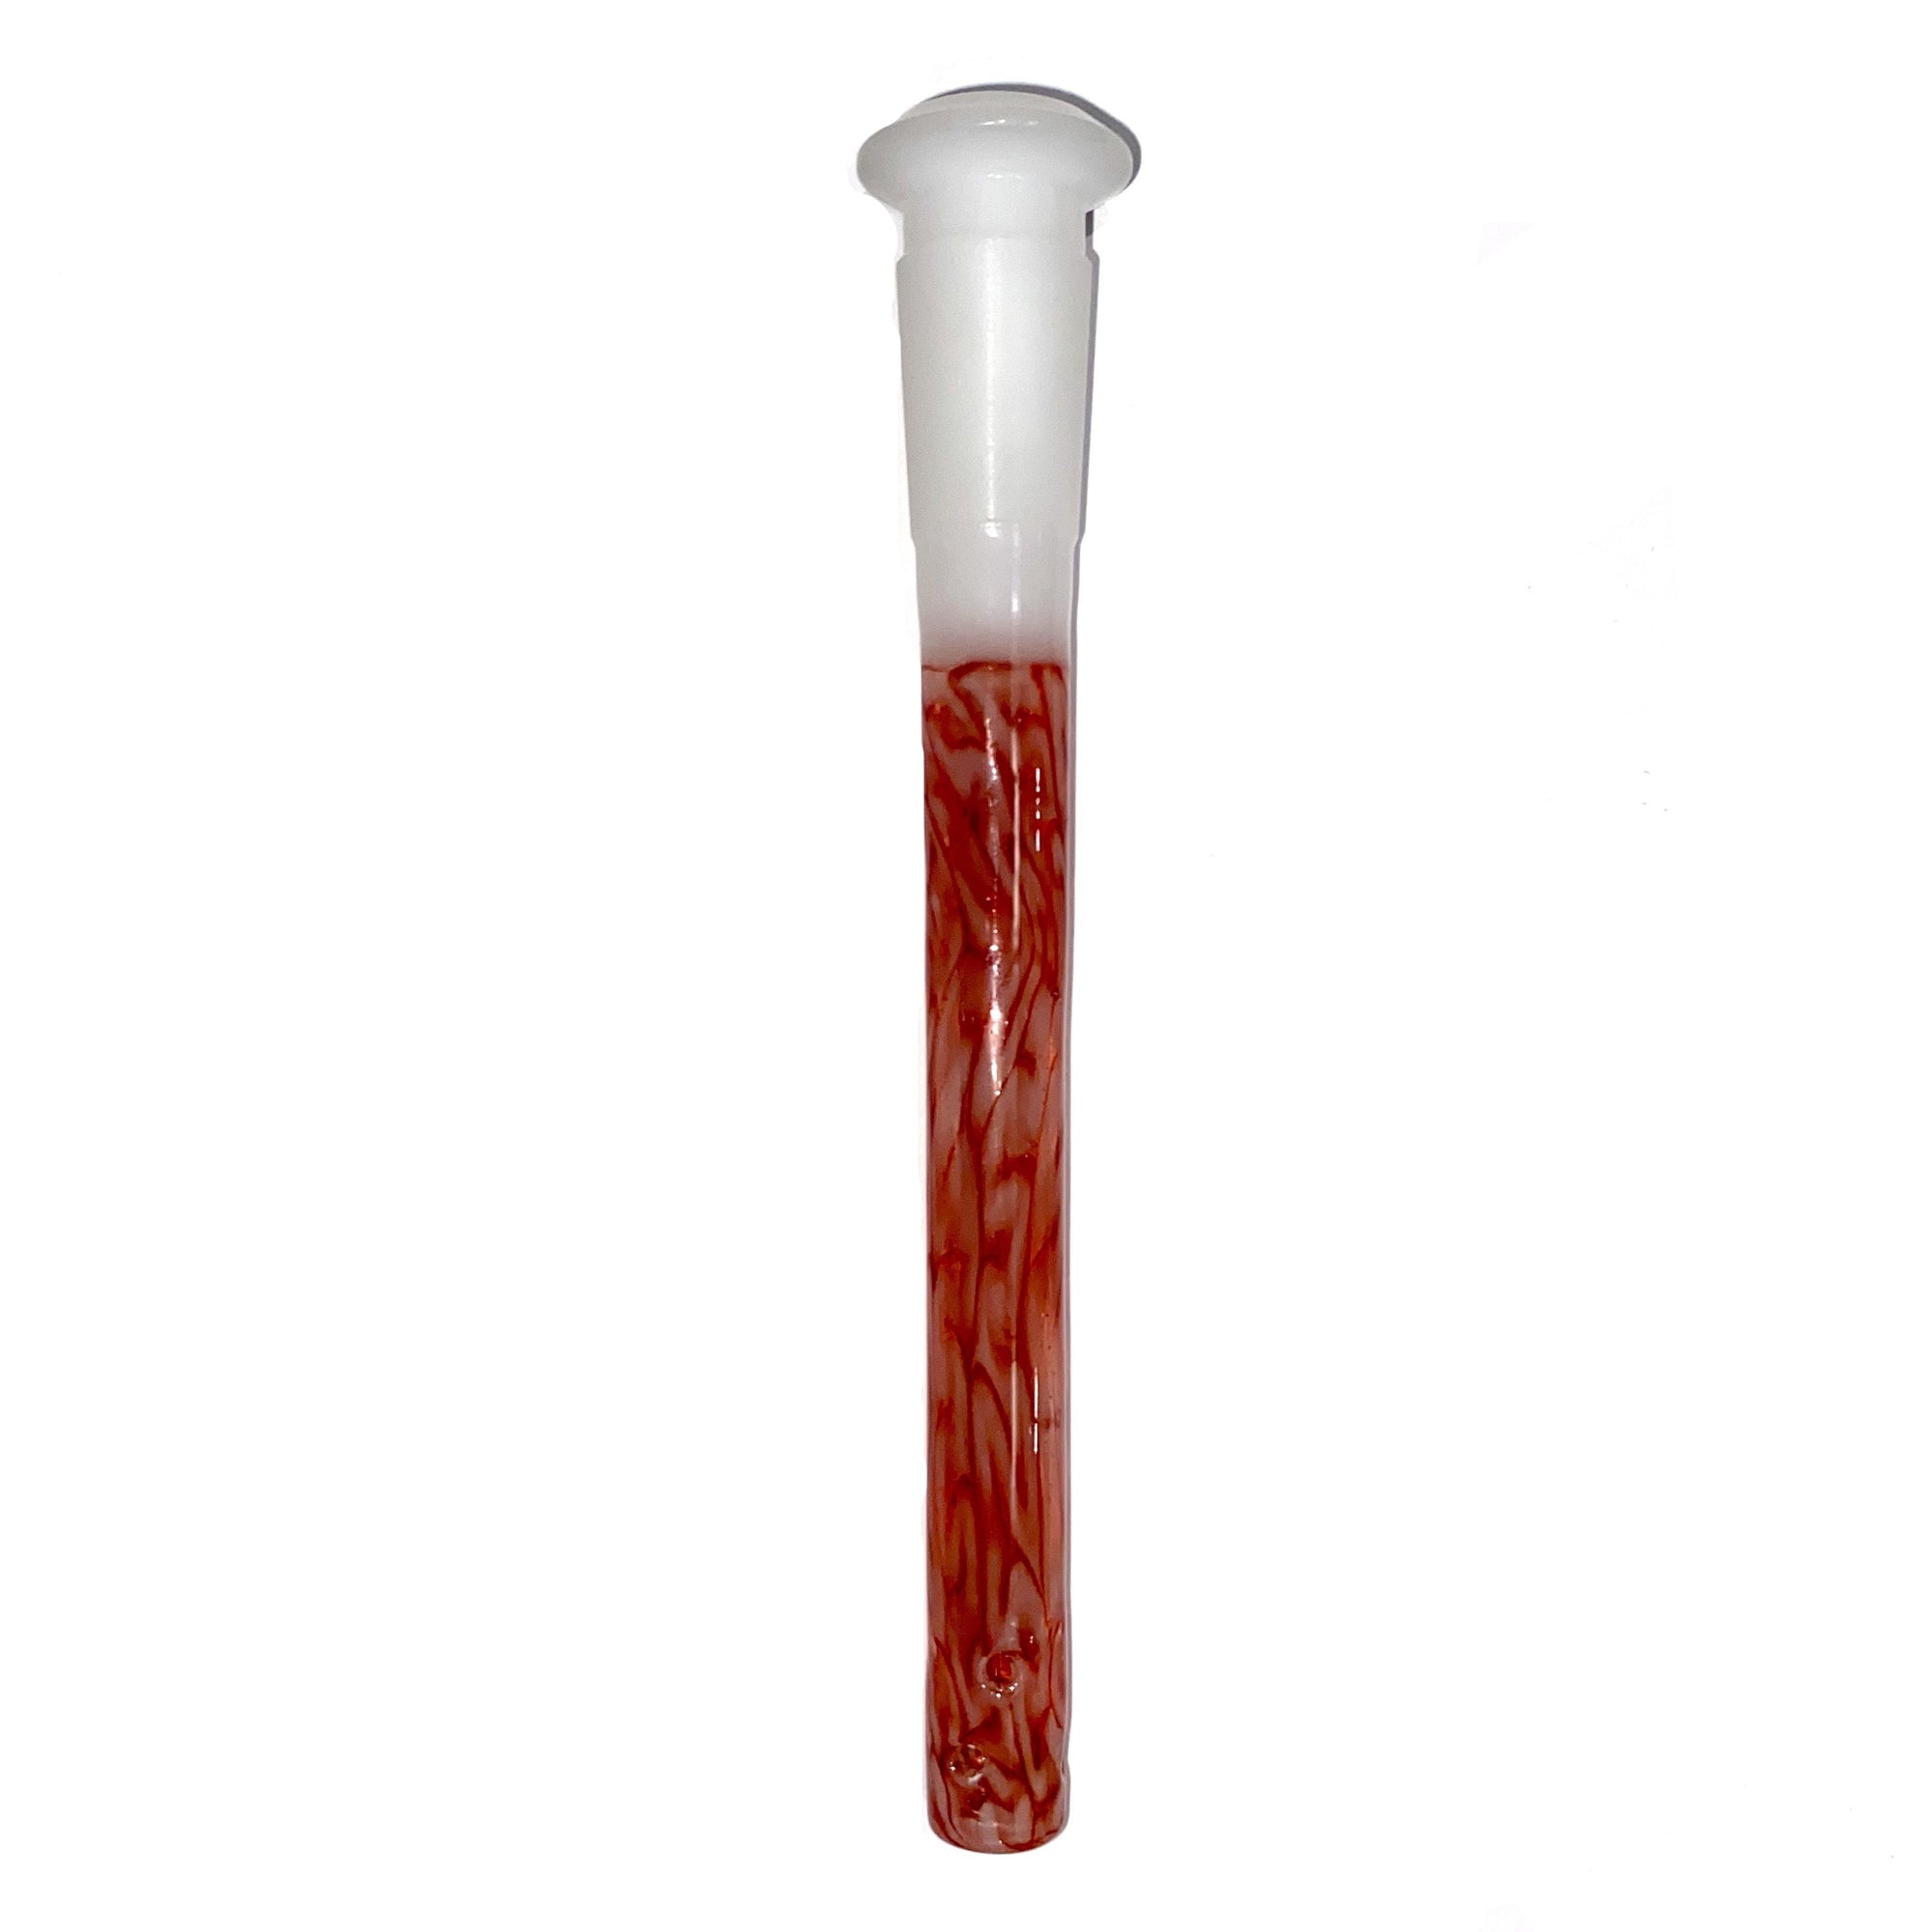 Dustorm 18/14 Brain Tech Downstem (Red with White Joint) show variants